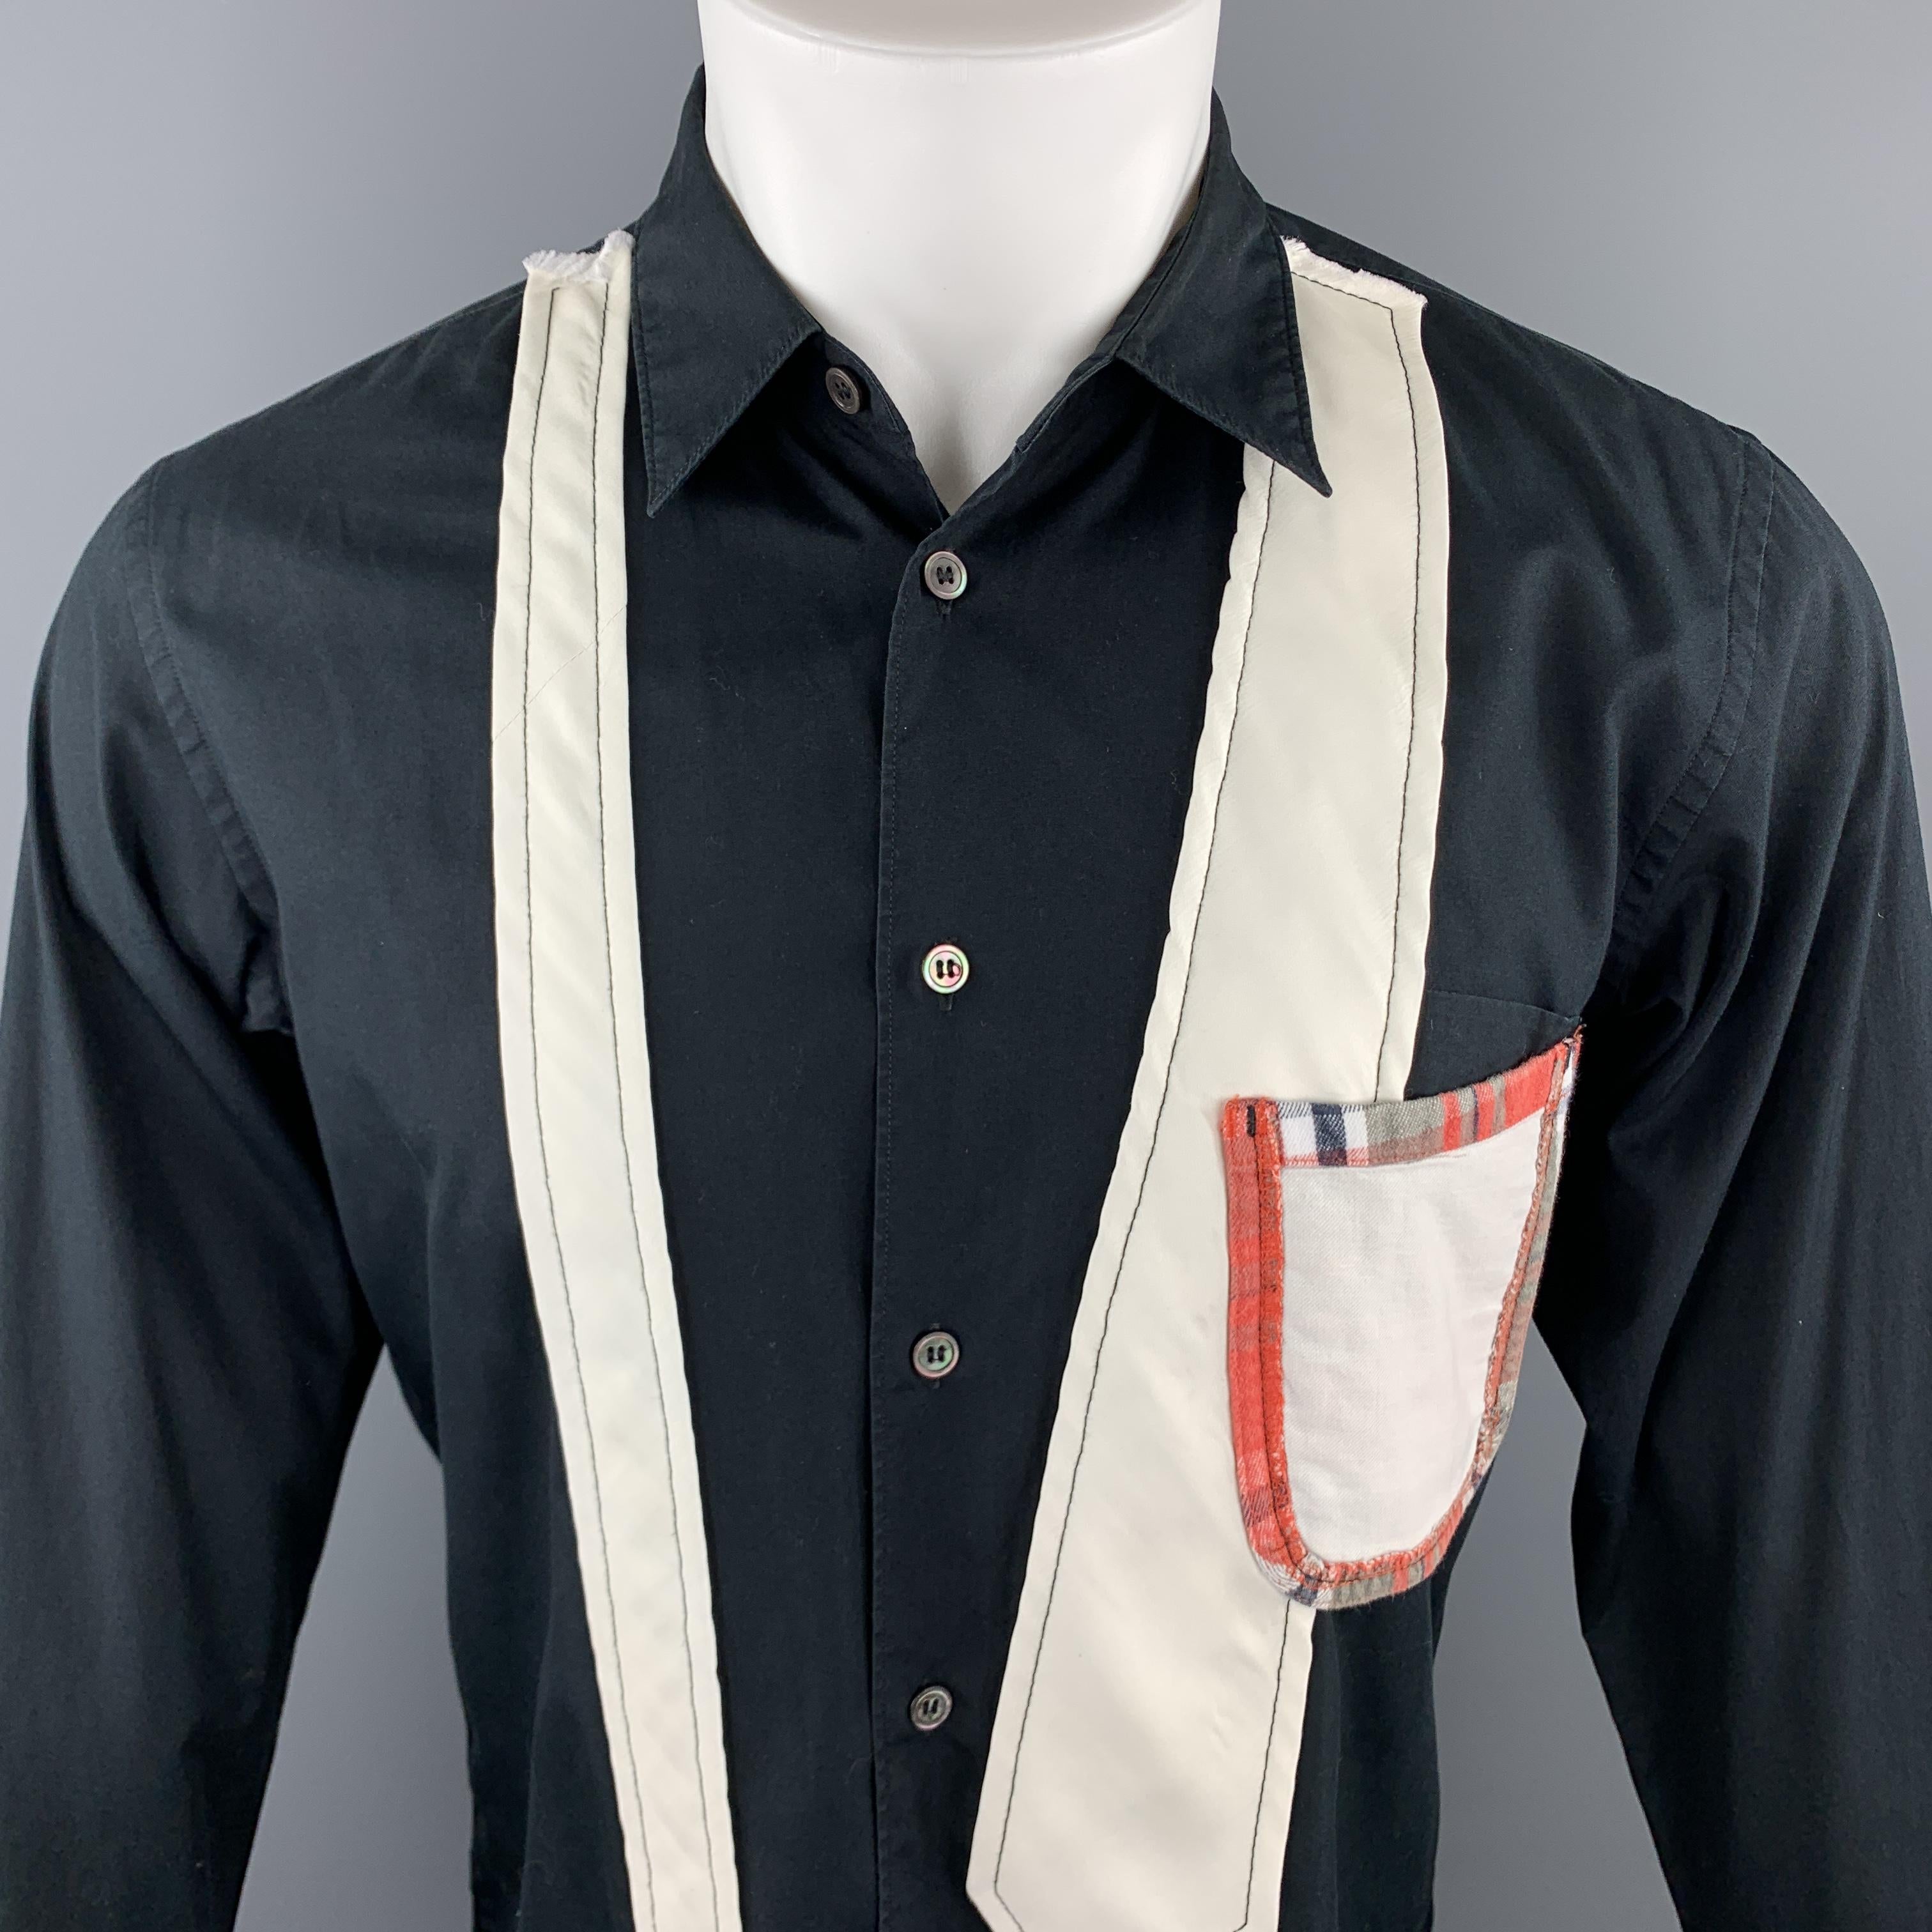 COMME des GARCONS HOMME PLUS long sleeve shirt comes in a solid black cotton material, with a white deconstructed tie applique, a patchwork patch pocket, and buttoned cuffs. Made in Japan.

Very Good Pre-Owned Condition.
Marked: S 